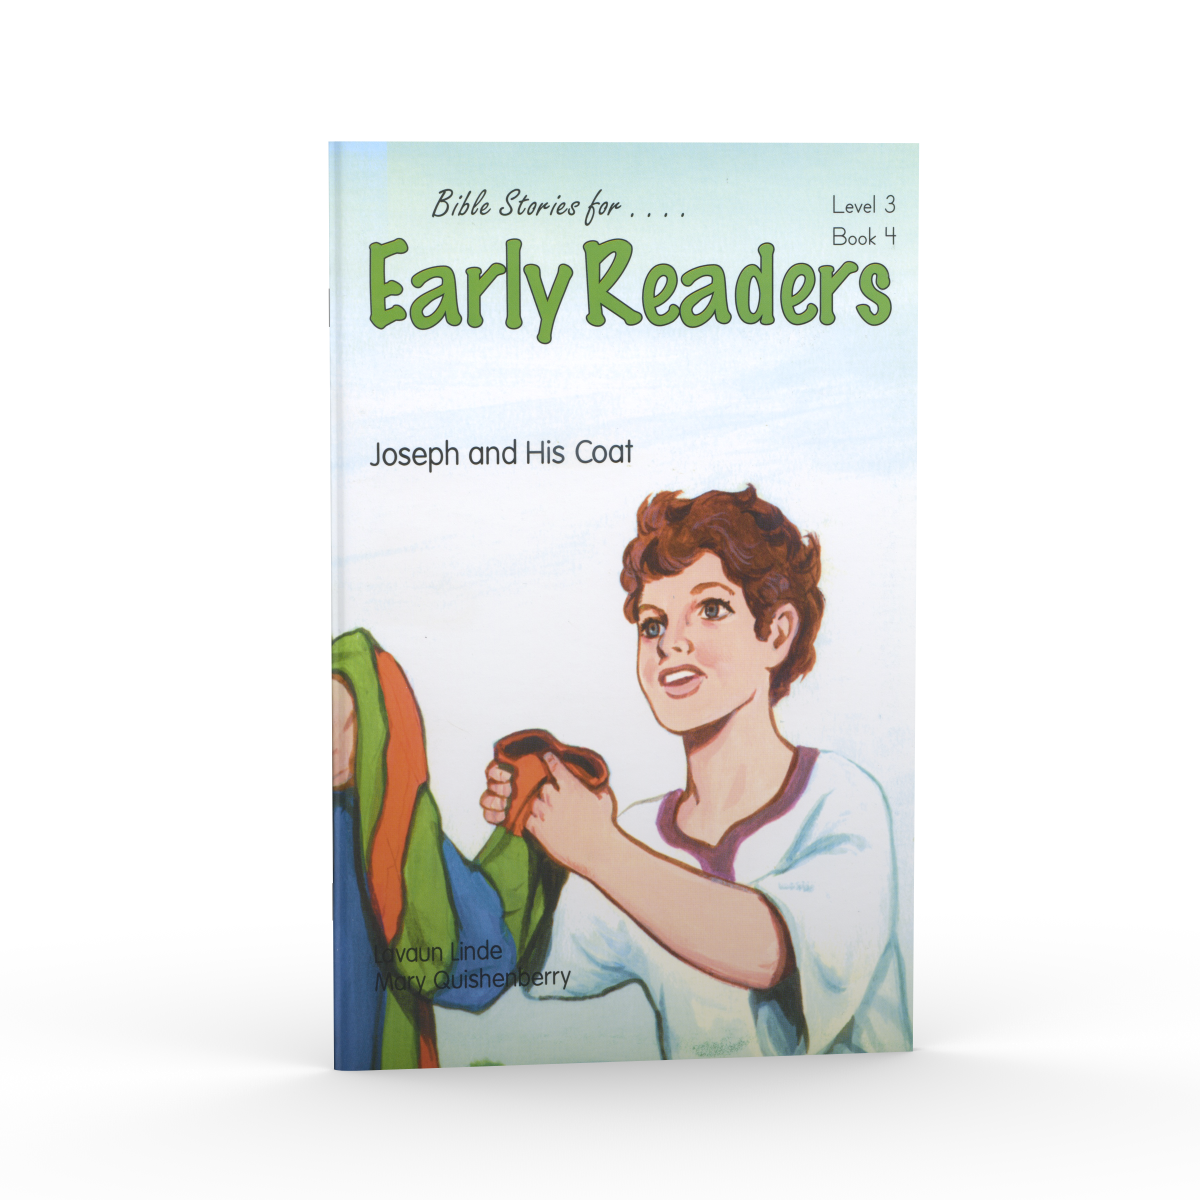 Joseph and His Coat (Bible Stories for Early Readers – Level 3, Book 4)